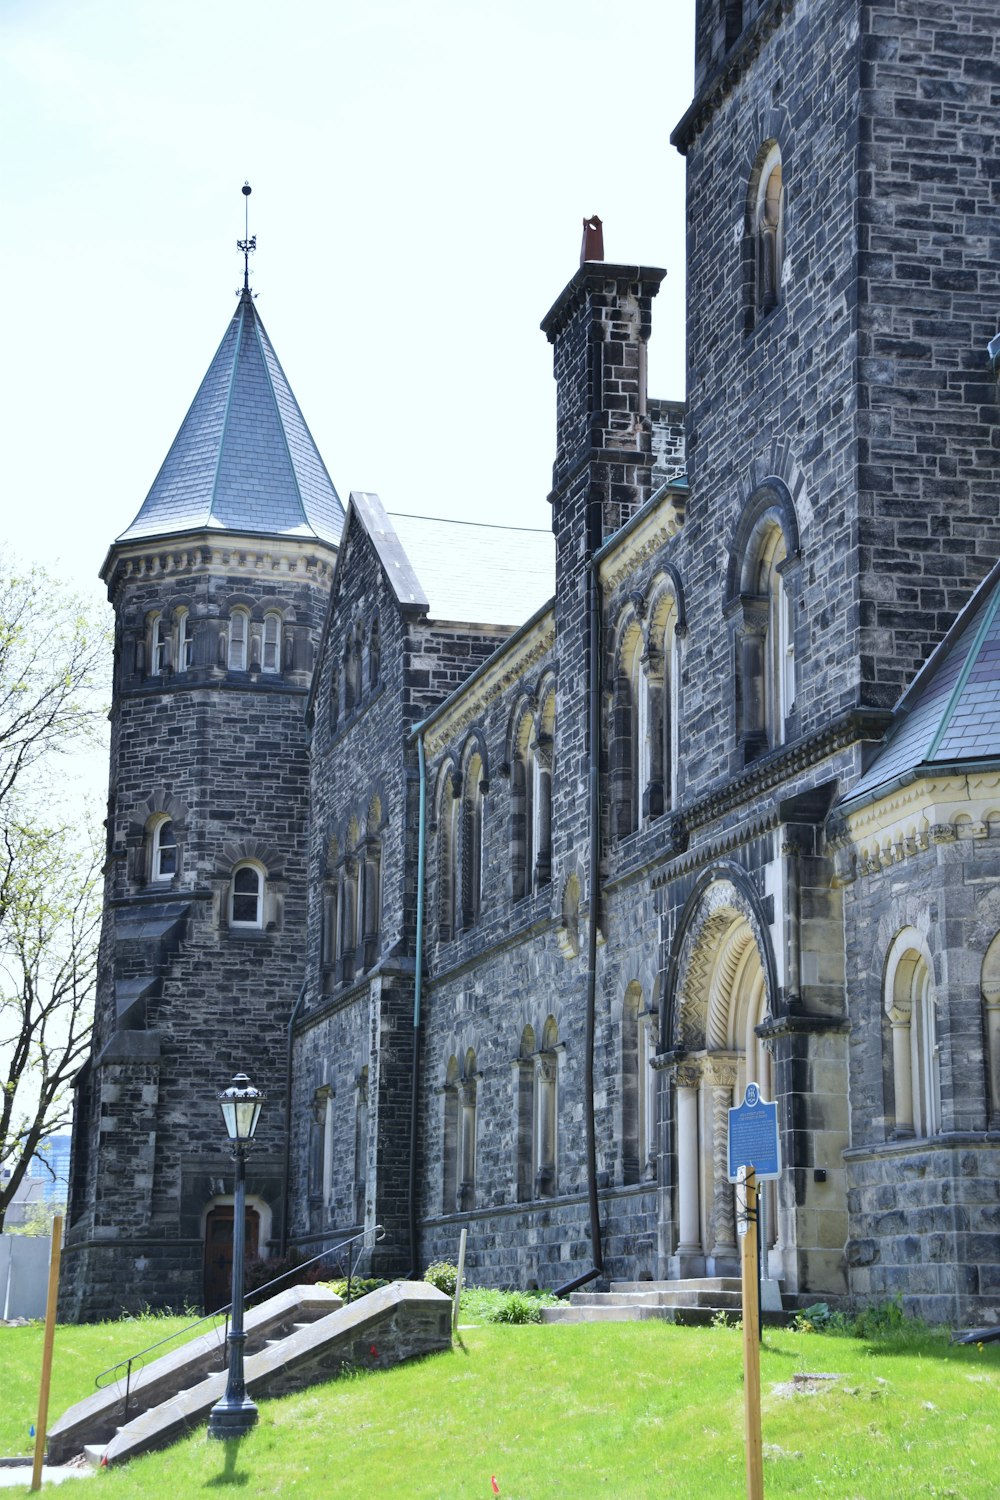 a large stone building with a clock tower